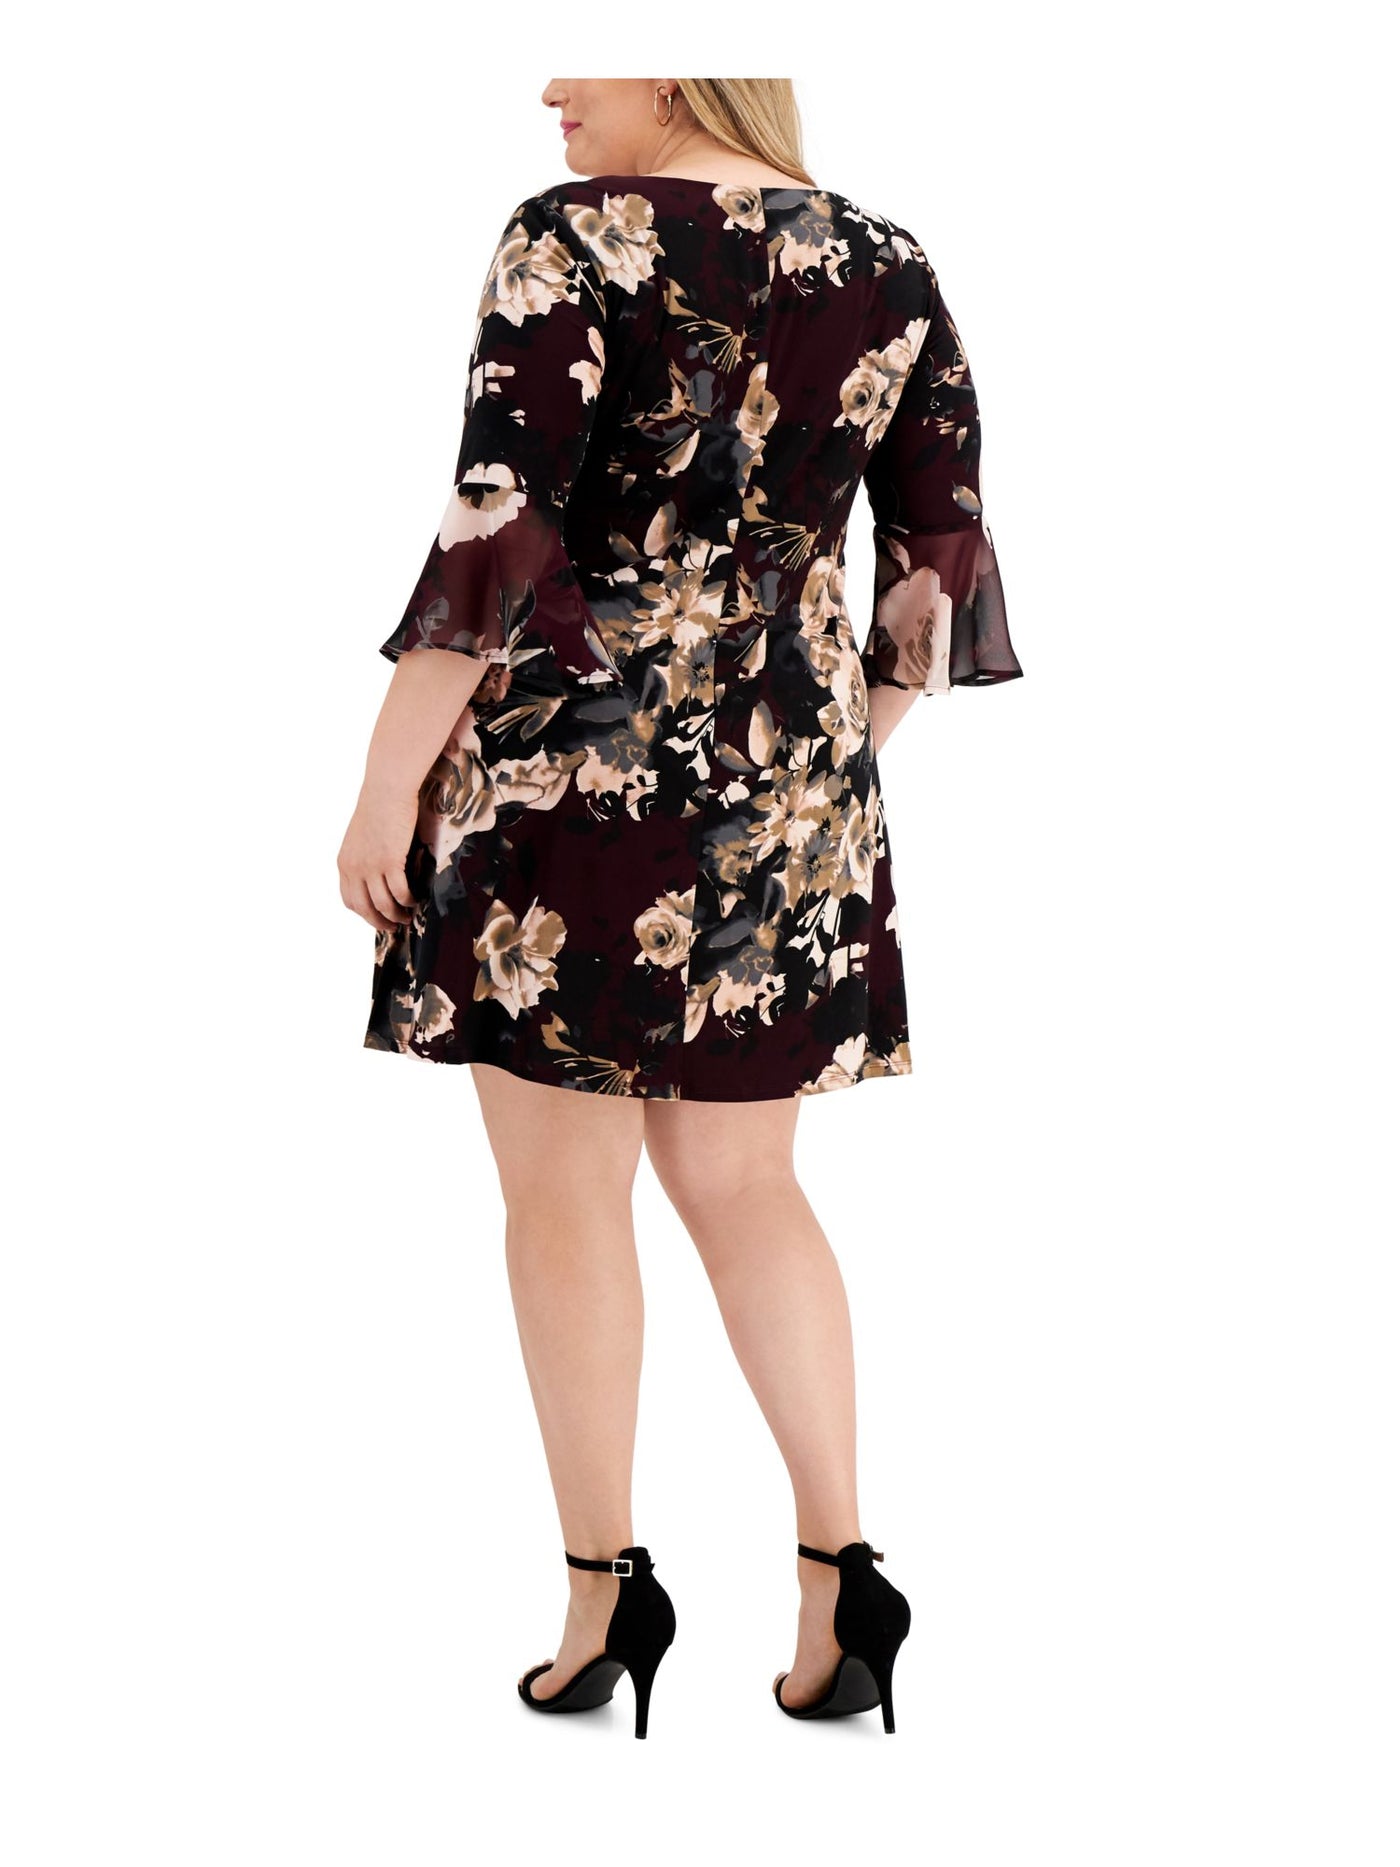 CONNECTED APPAREL Womens Burgundy Stretch Floral Bell Sleeve V Neck Above The Knee Cocktail Fit + Flare Dress Plus 18W